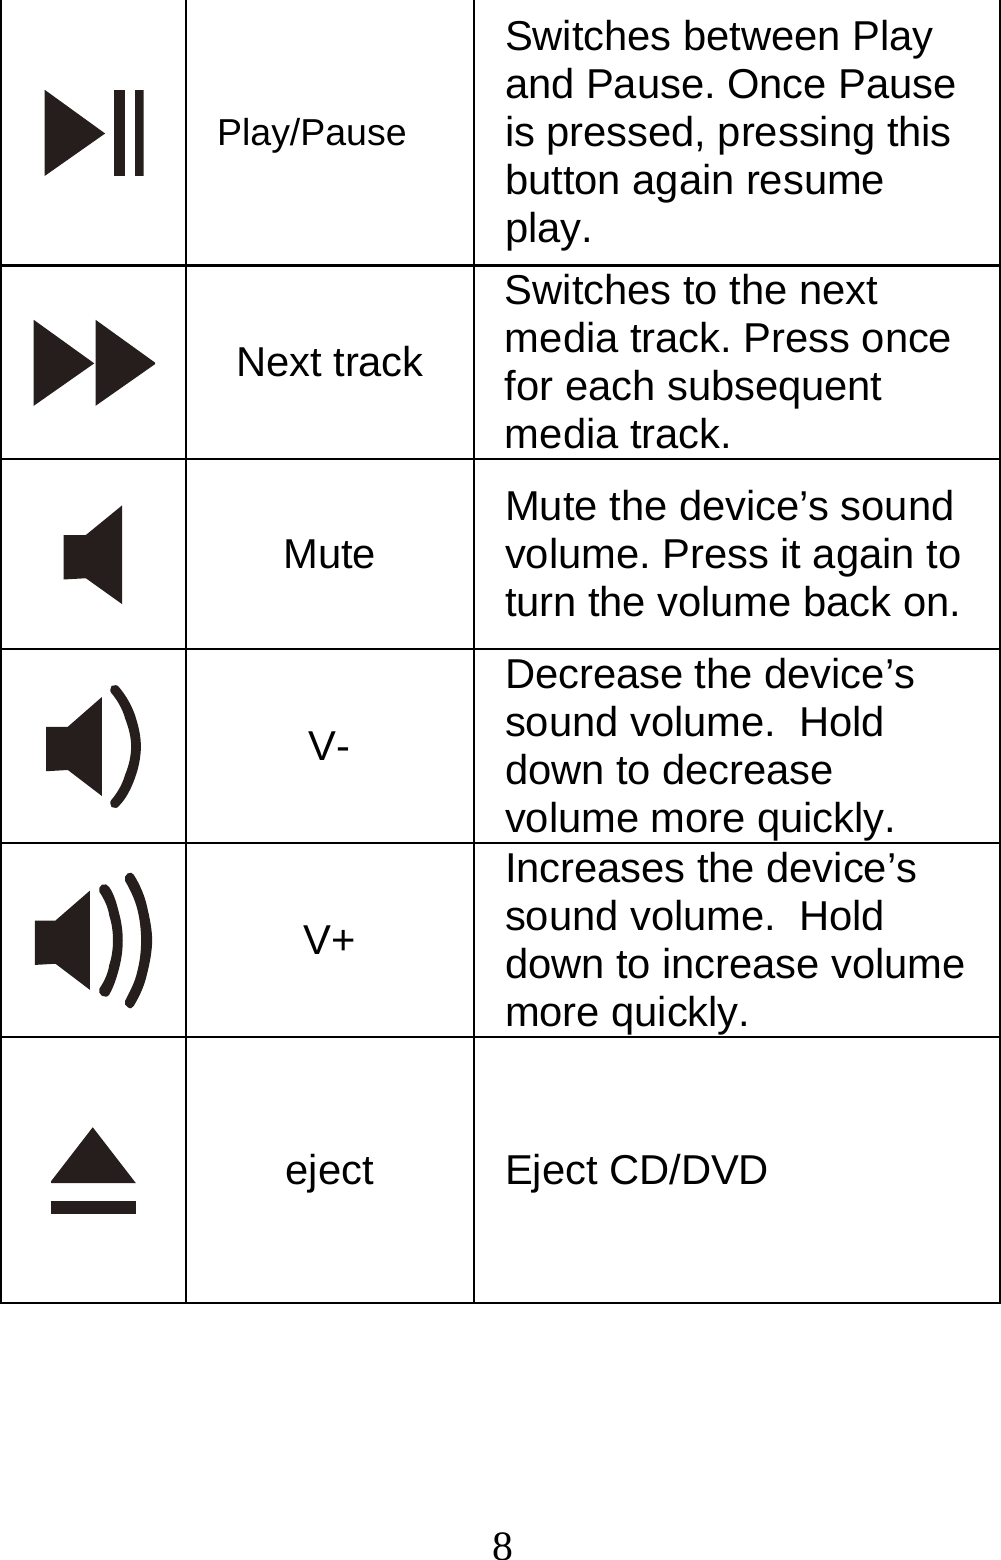  8 Play/Pause Switches between Play and Pause. Once Pause is pressed, pressing this button again resume play.  Next track Switches to the next media track. Press once for each subsequent media track.  Mute  Mute the device’s sound volume. Press it again to turn the volume back on.  V- Decrease the device’s sound volume.  Hold down to decrease volume more quickly.  V+ Increases the device’s sound volume.  Hold down to increase volume more quickly.  eject  Eject CD/DVD 